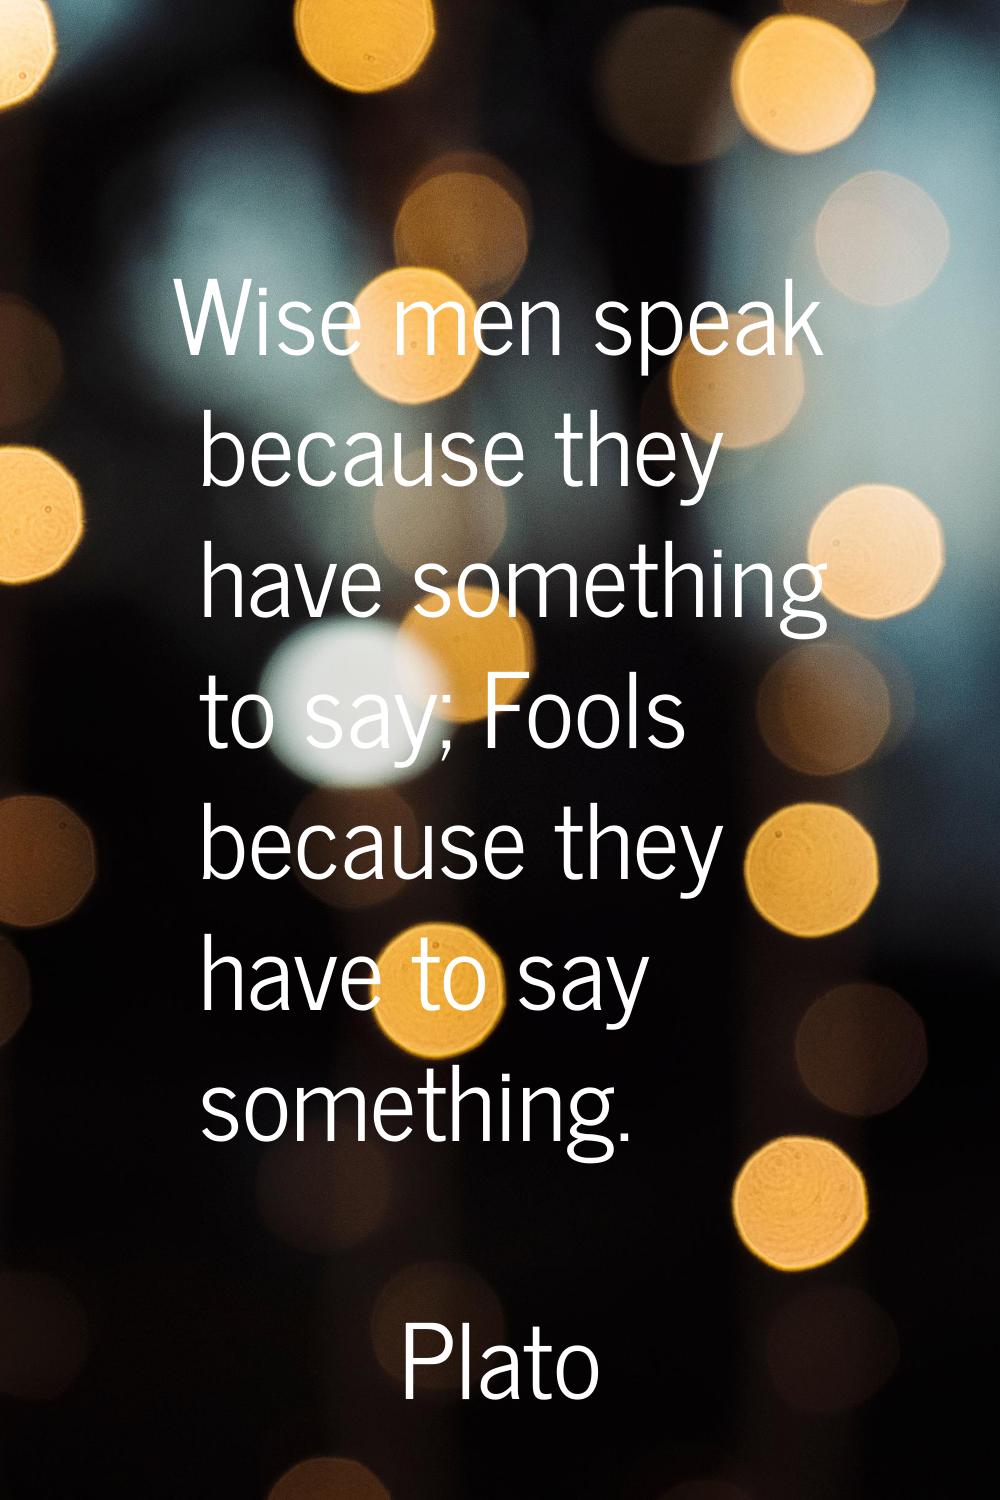 Wise men speak because they have something to say; Fools because they have to say something.